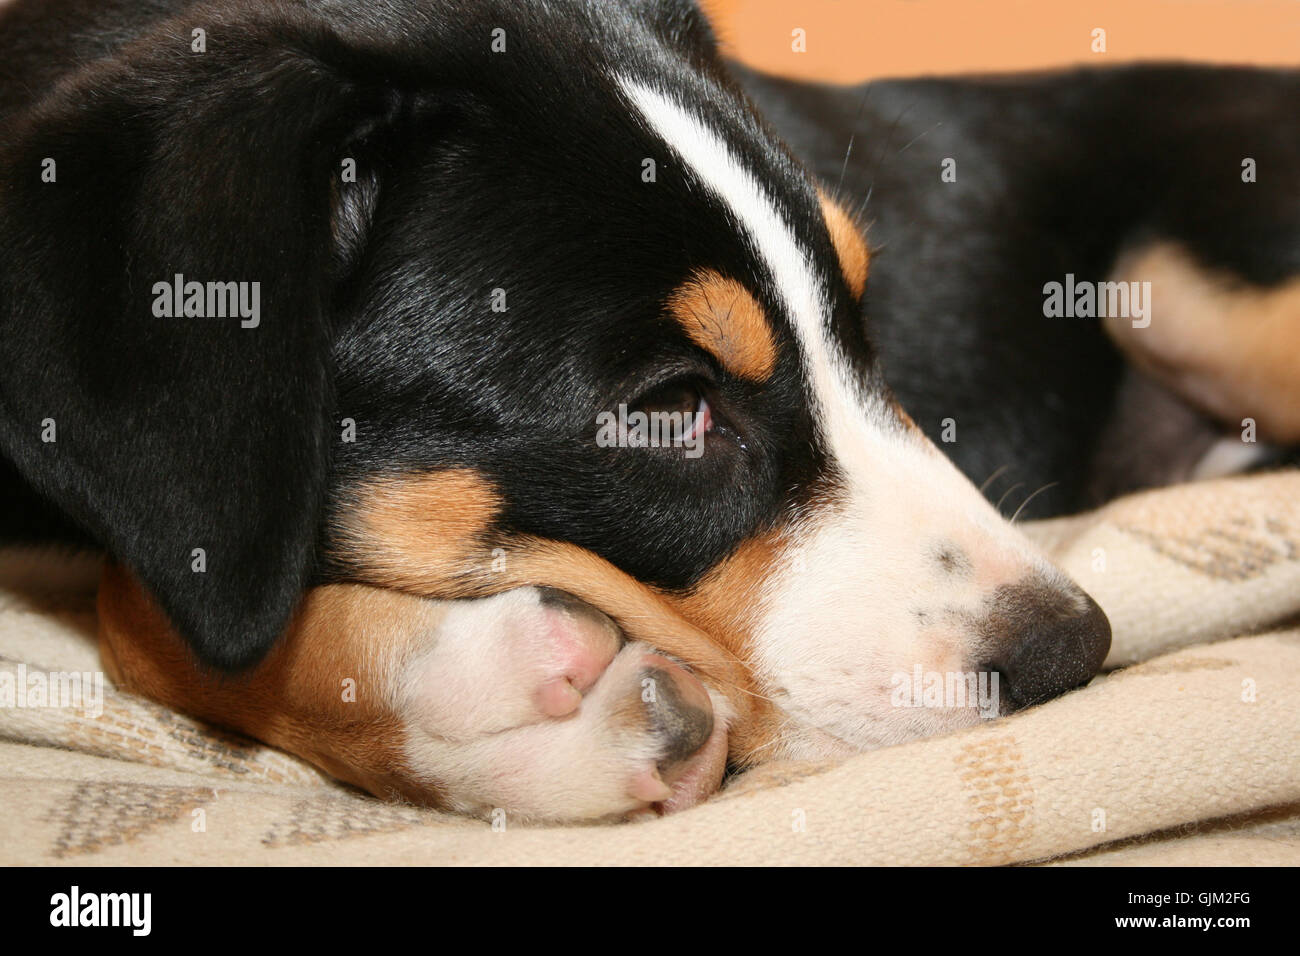 Swiss Mountain dog puppy Banque D'Images